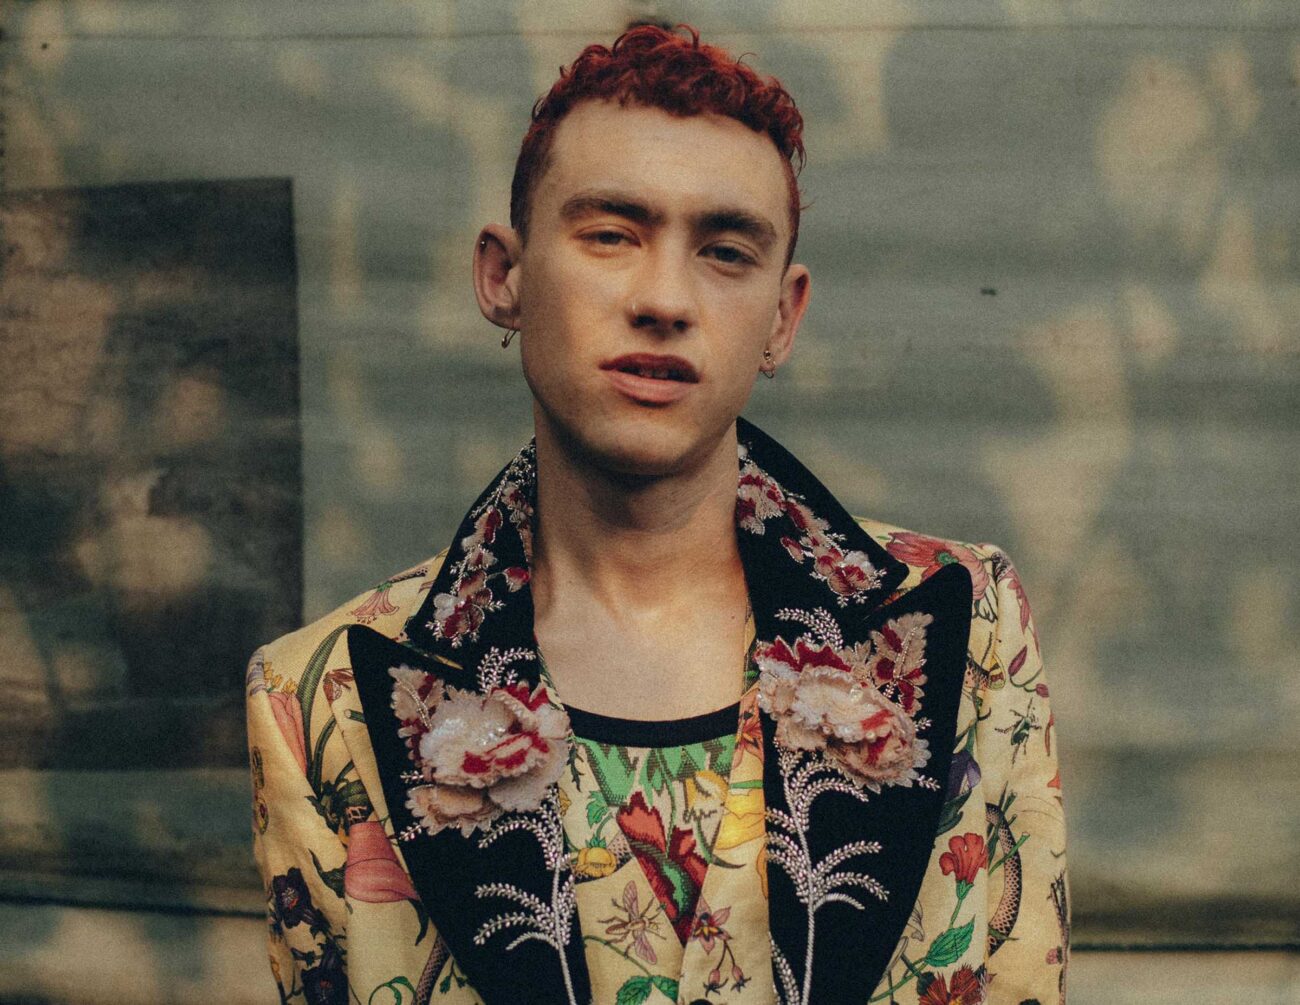 'It’s a Sin' is taking Channel 4 viewers by storm and we're loving it. Find out more about the leading man Olly Alexander.